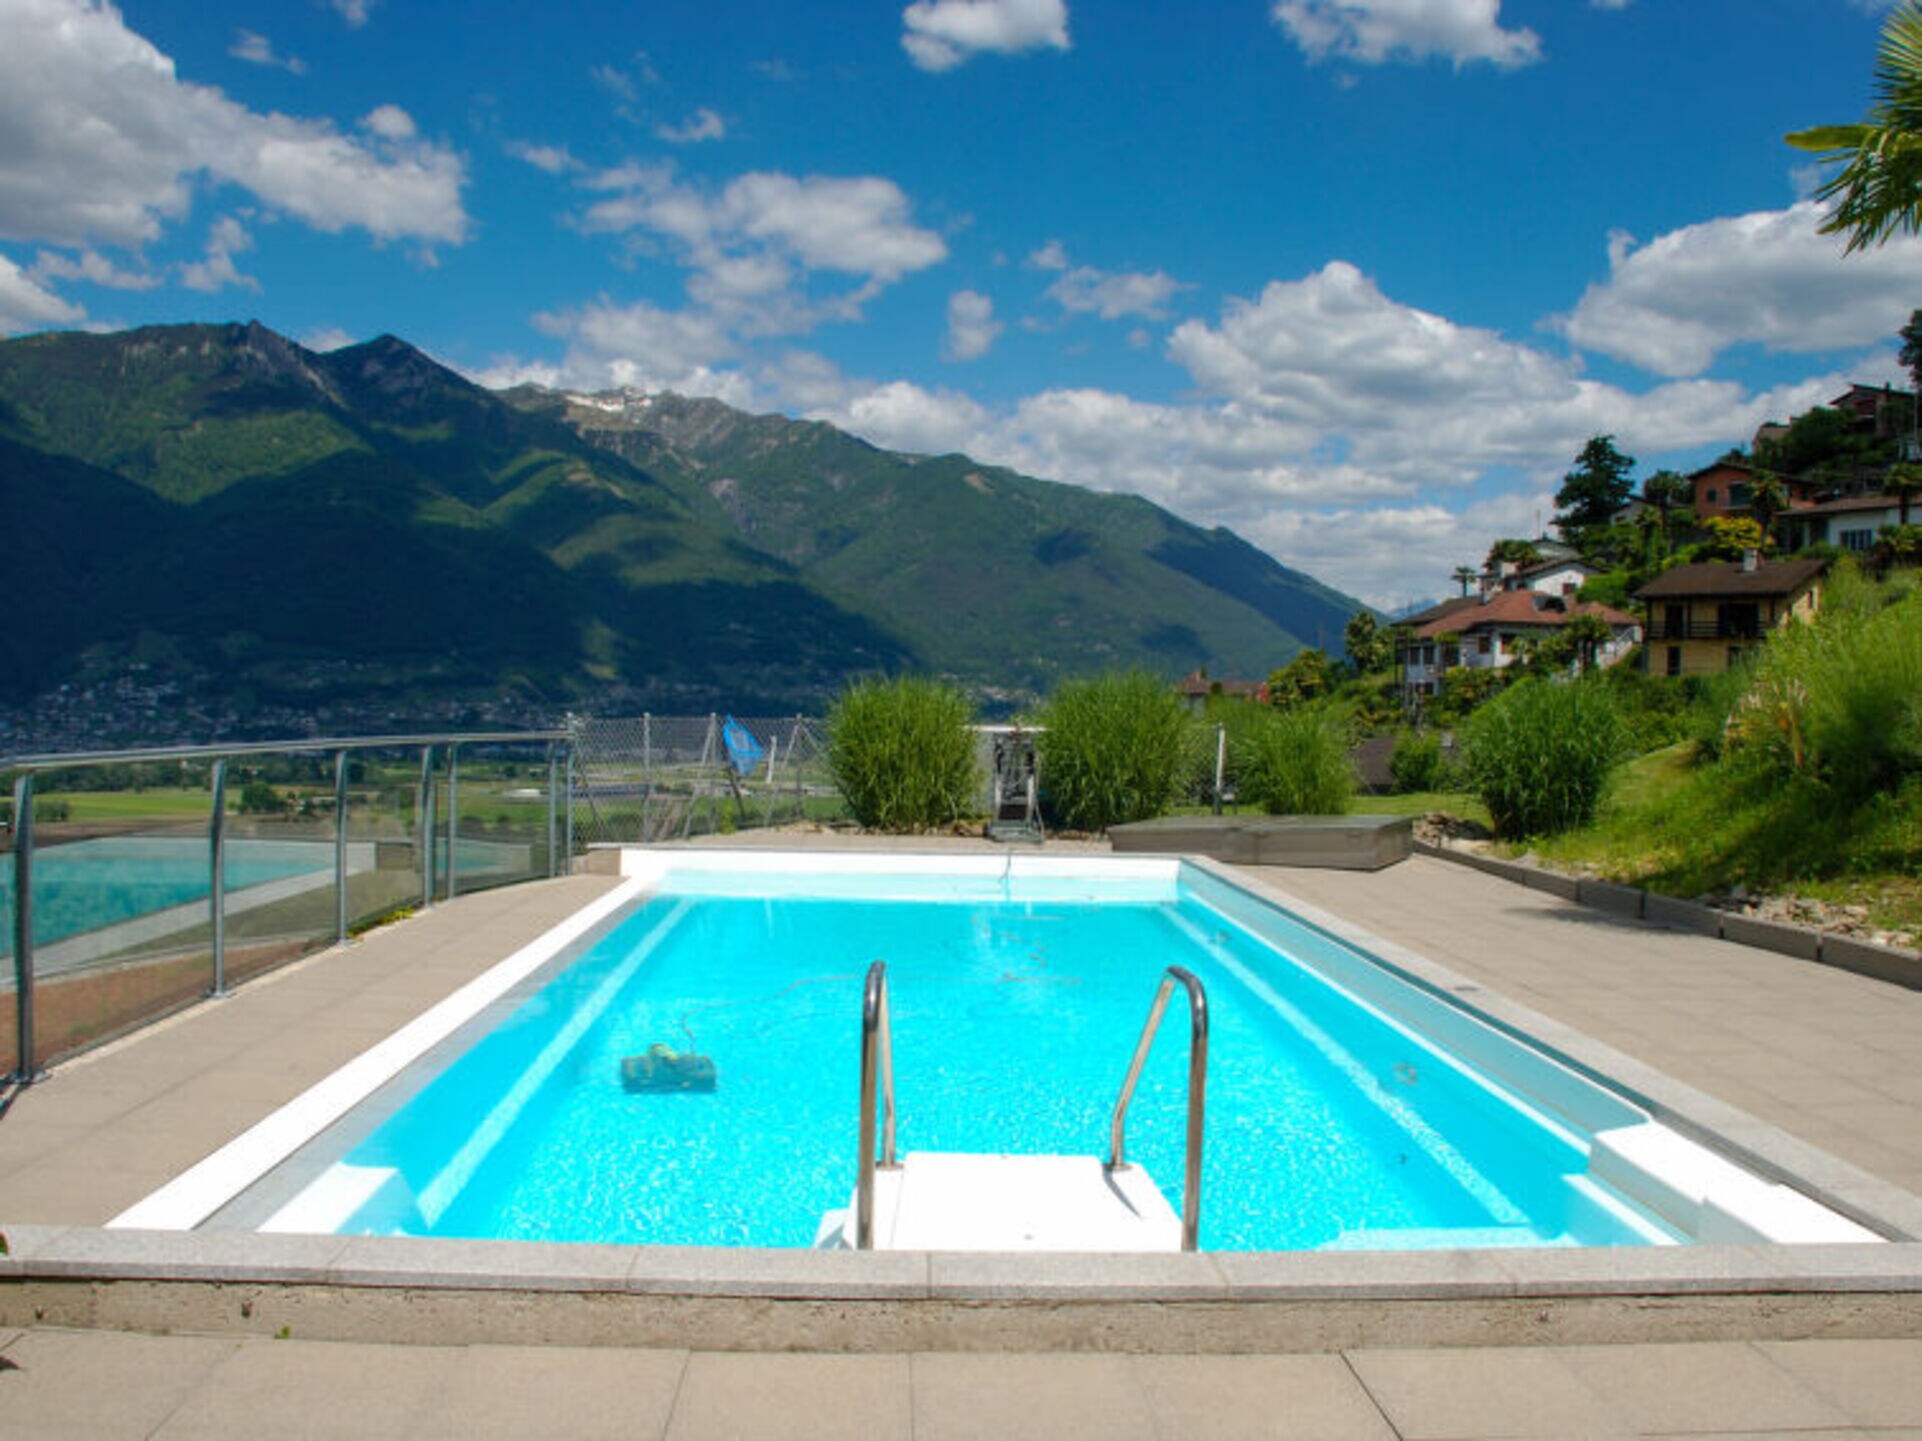 Property Image 2 - Property Manager Villa with First Class Amenities, Ticino Villa 1006